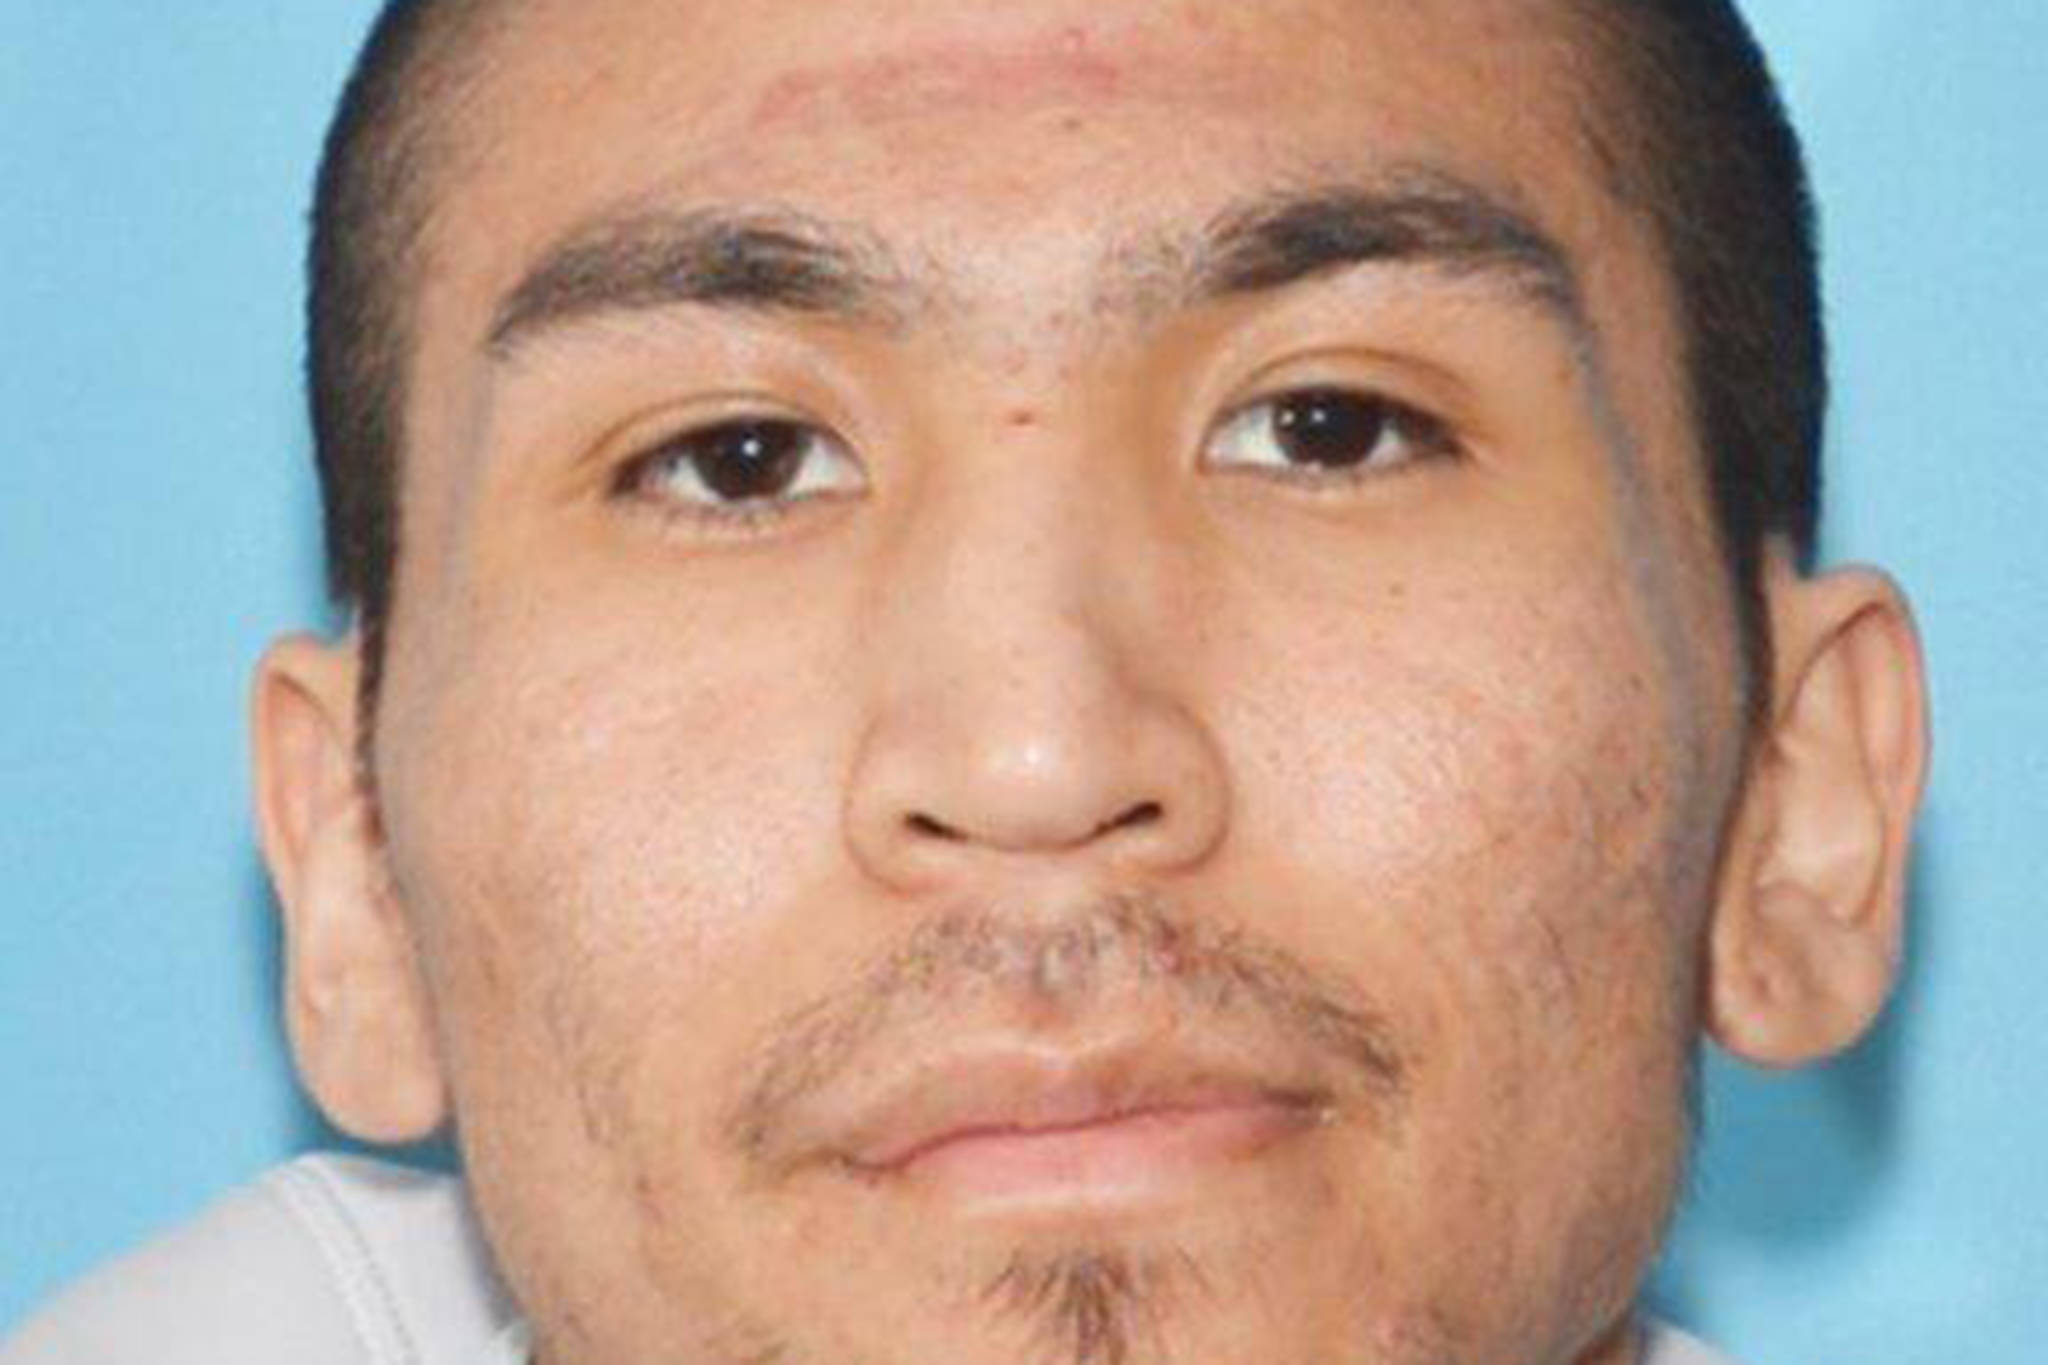 Jordan Irving Parker Oldham, 26, had two warrants out for his arrest, according to a Juneau Police Department Press release. (Courtesy Photo | Juneau Police Department)